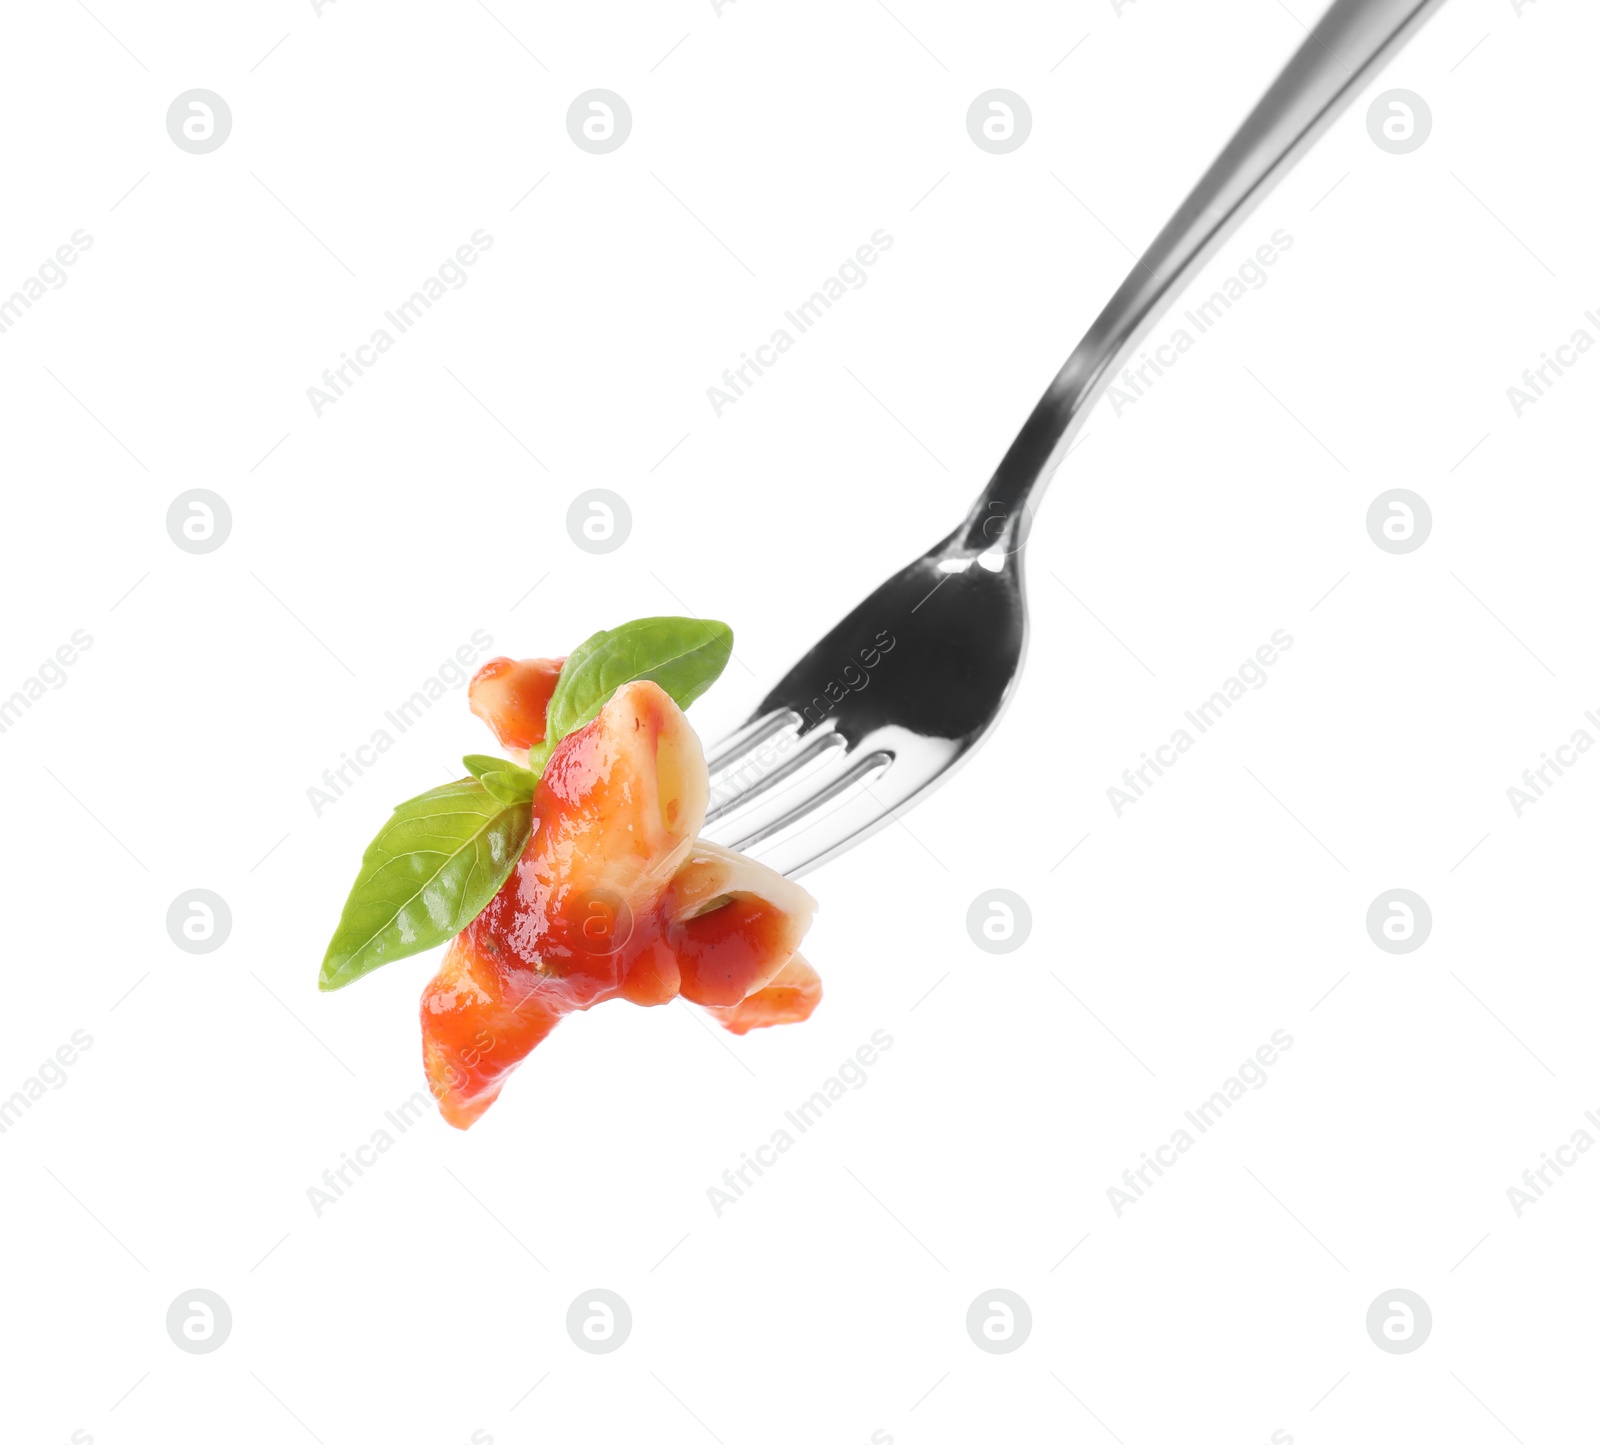 Photo of Delicious penne pasta with tomato sauce on fork against white background